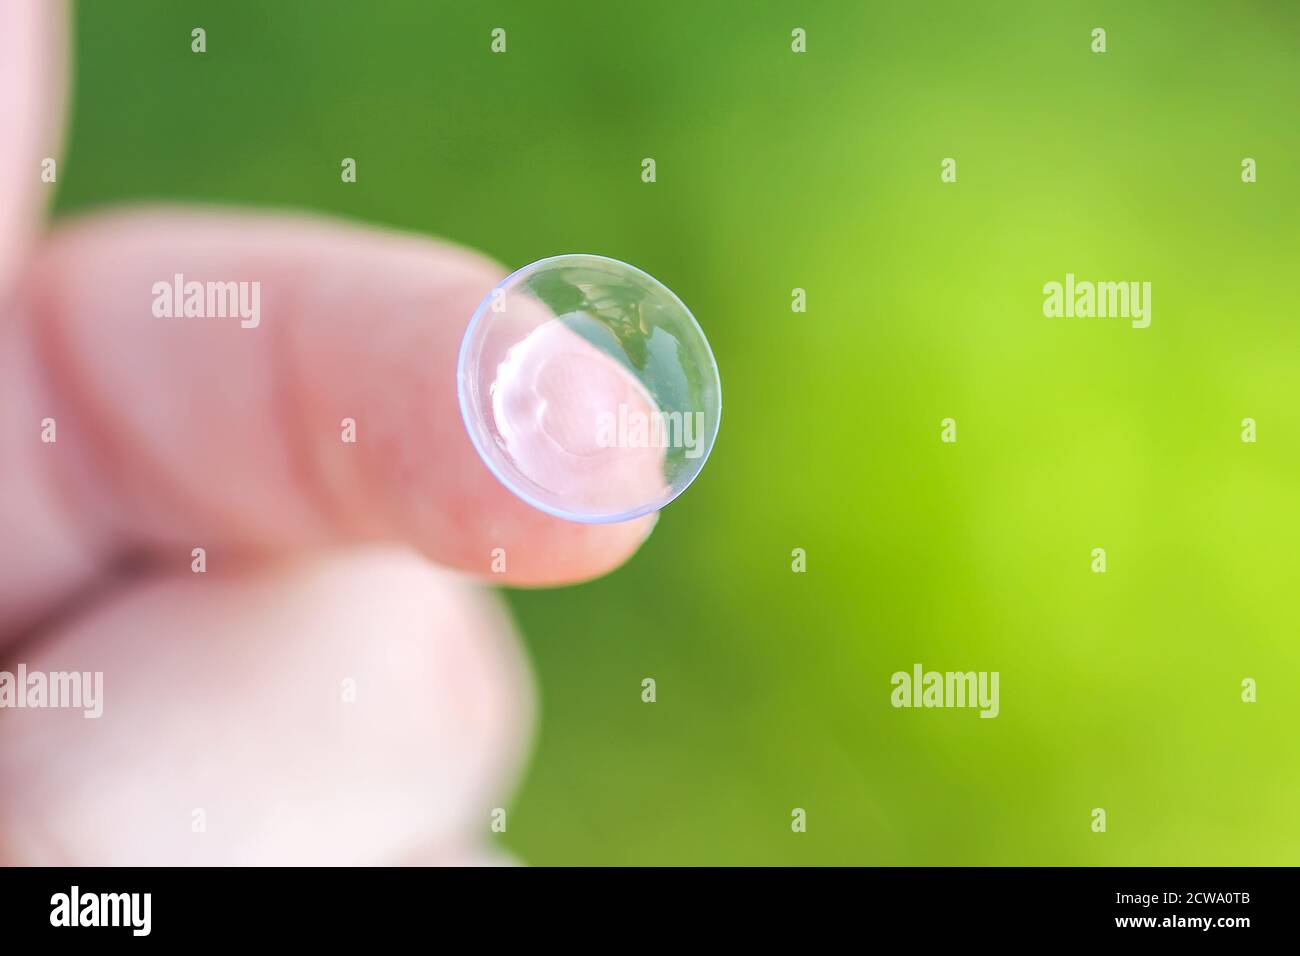 Transparent contact lens on finger tip on blurred green summer nature background. Stock Photo